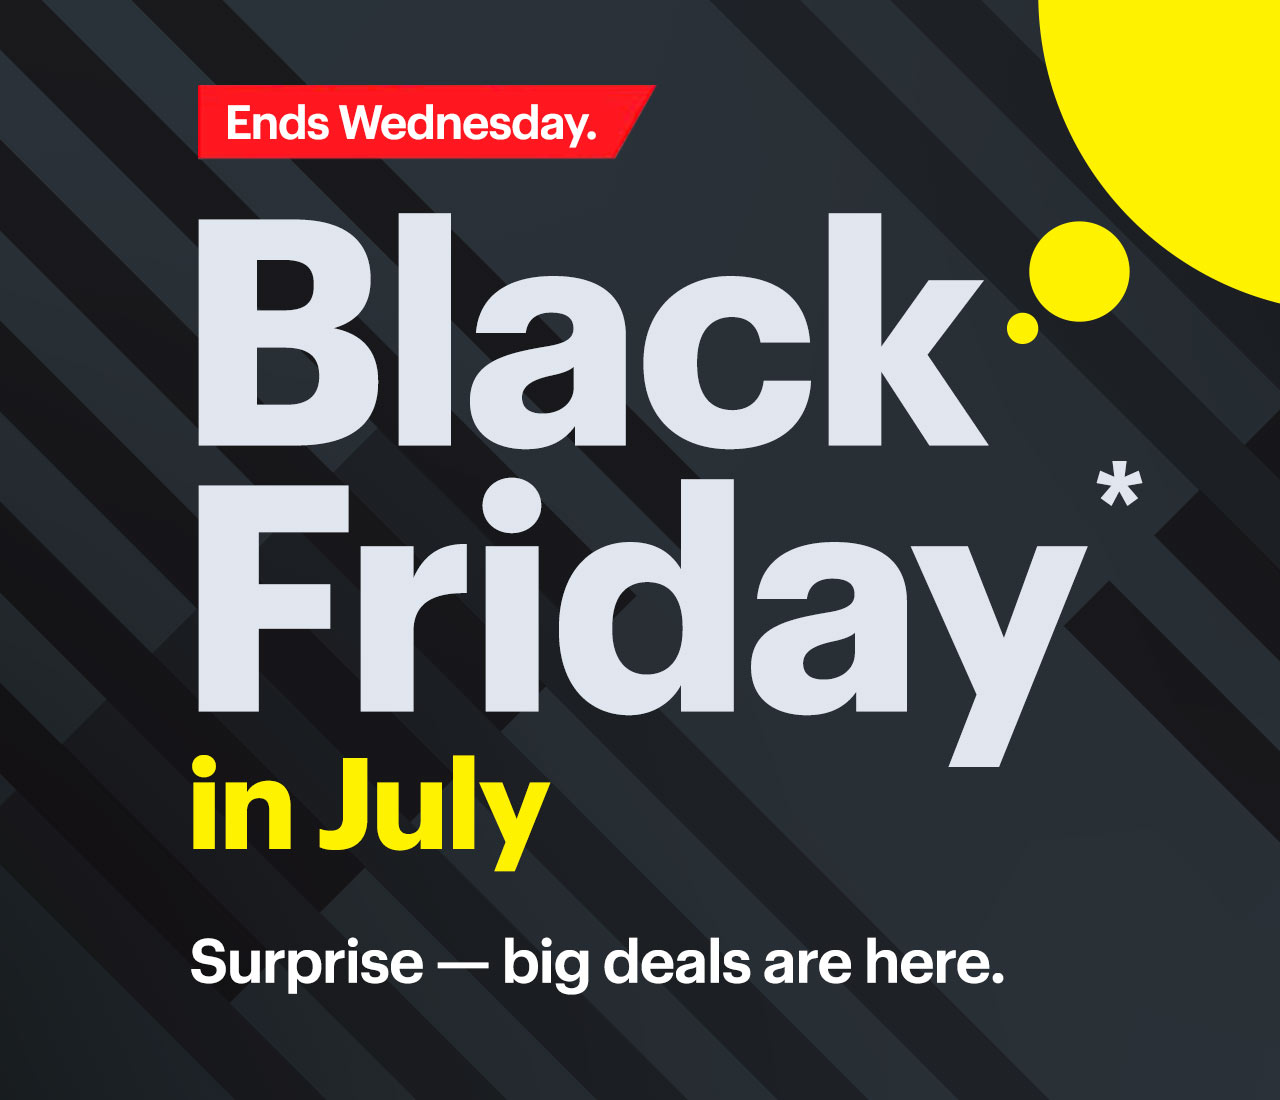 Black Friday in July. Surprise — big deals are here. Shop now. Ends Wednesday. Reference disclaimer.